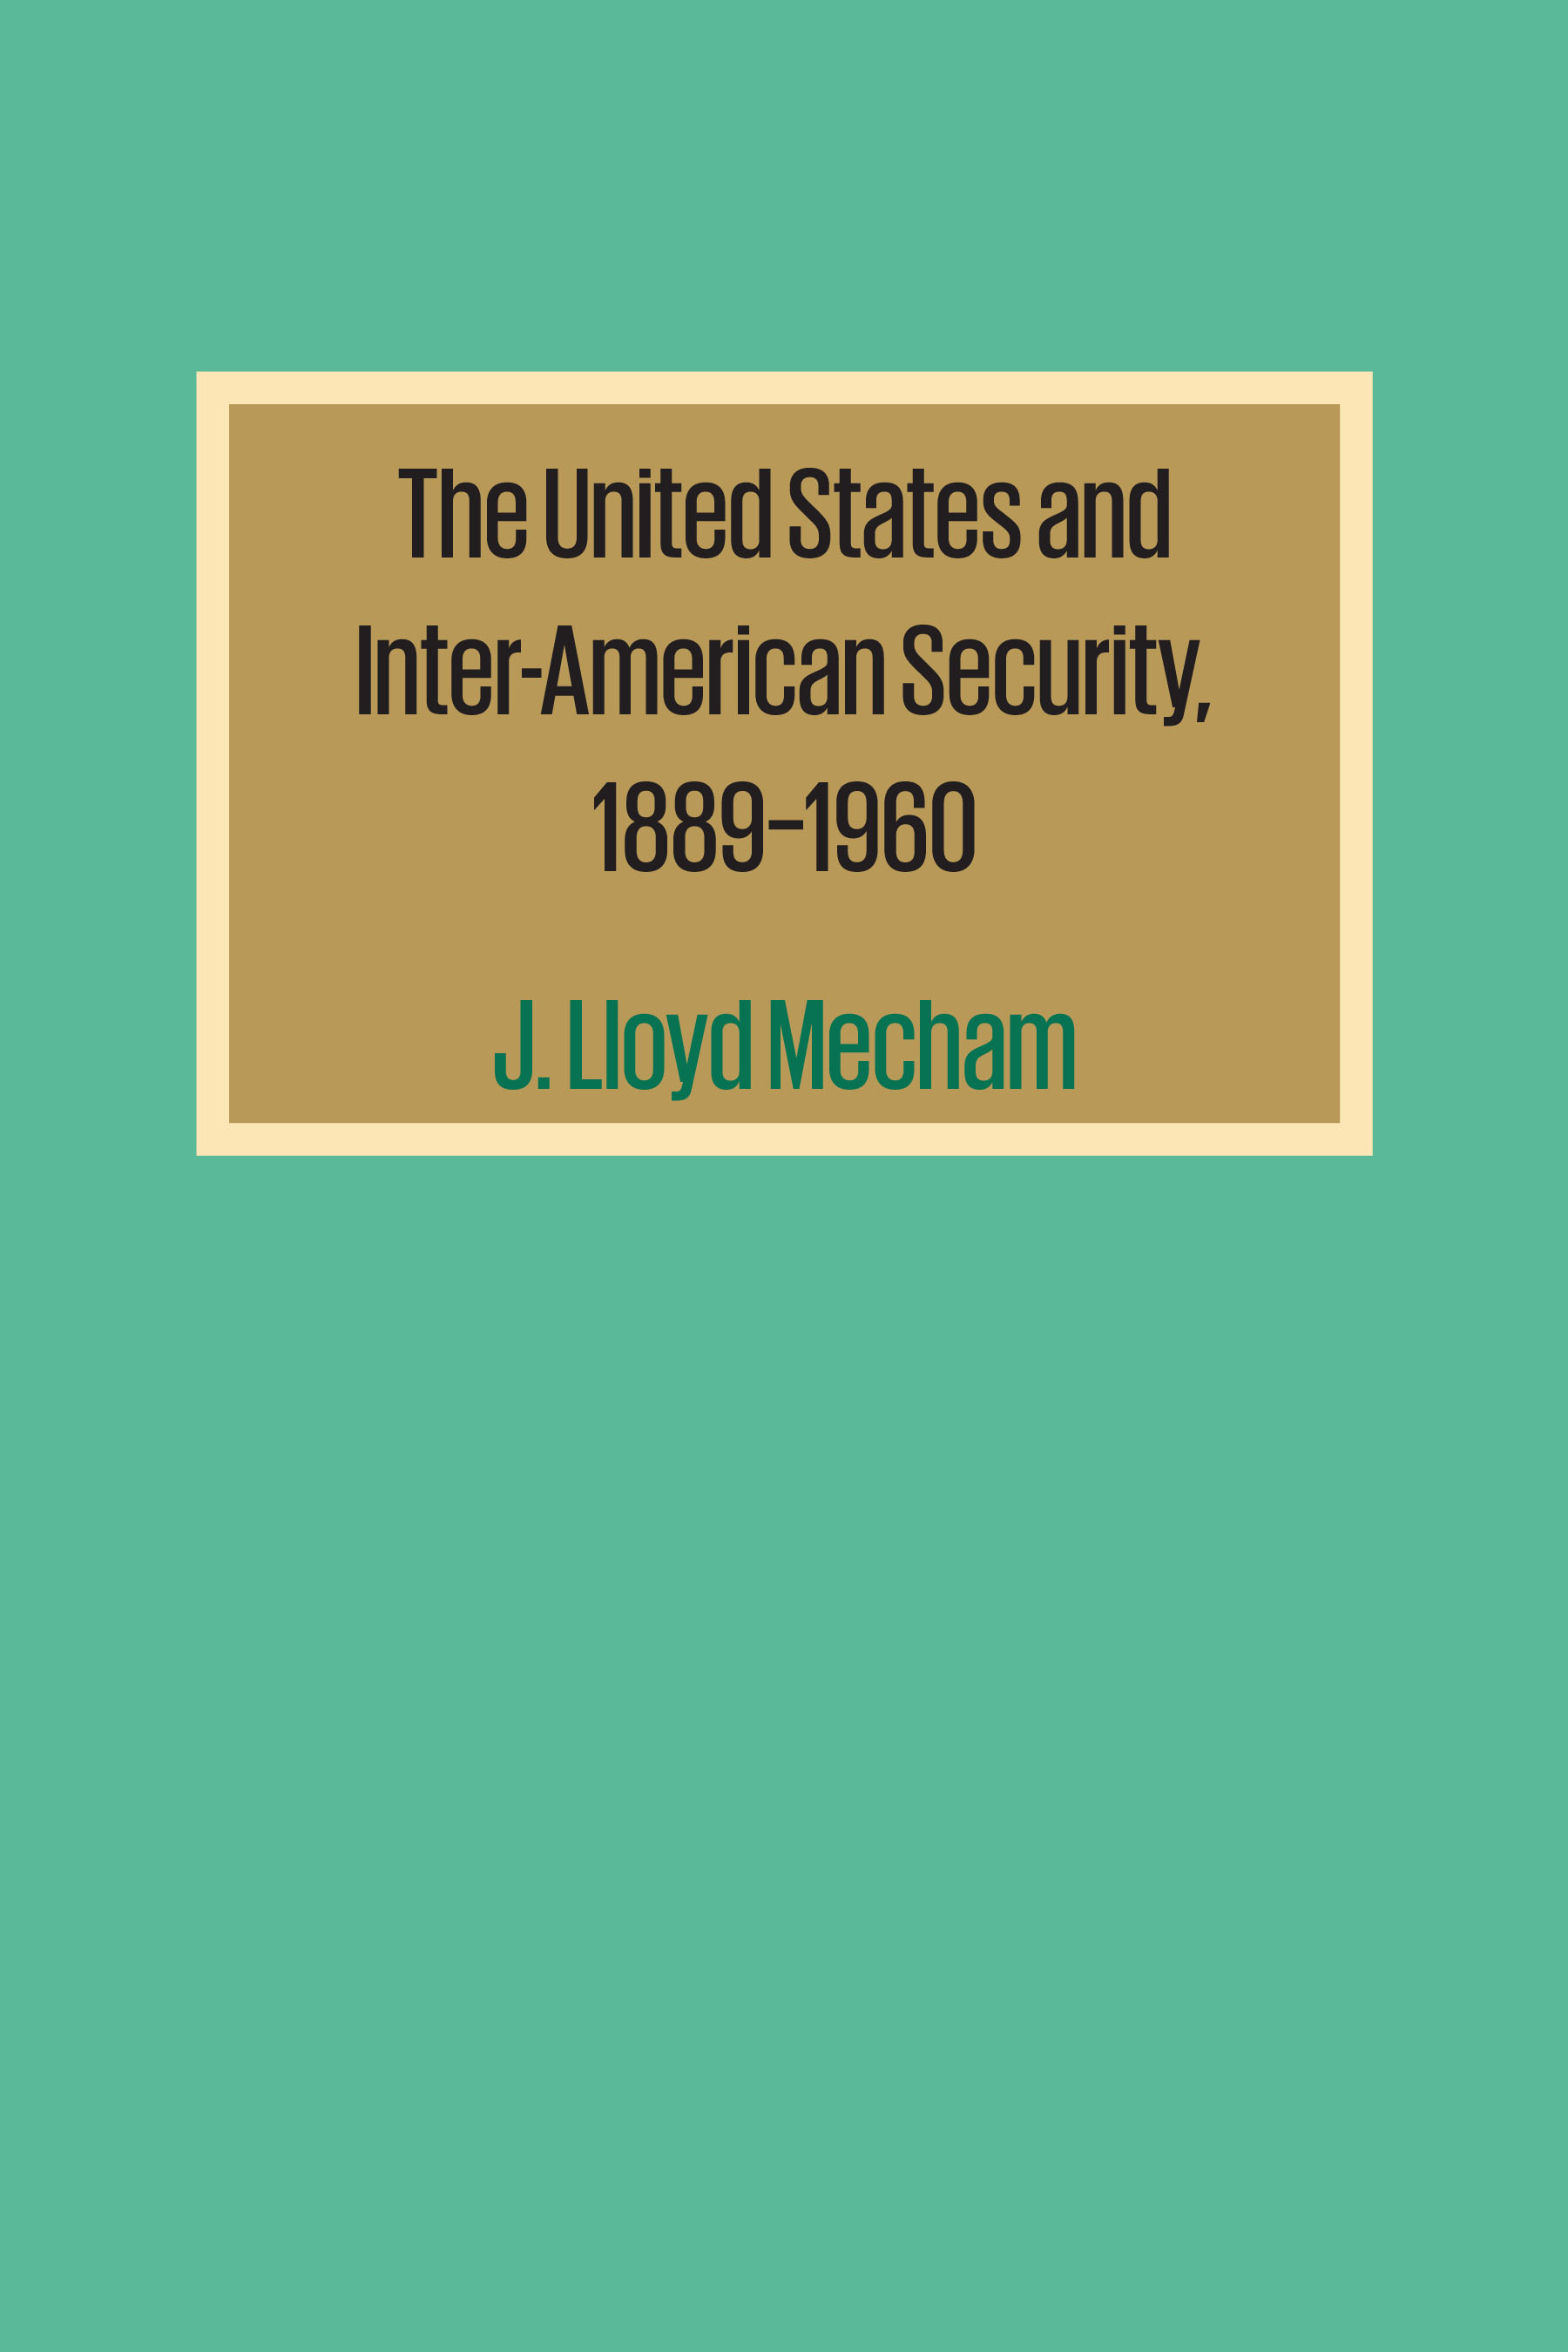 United States and Inter-American Security, 1889-1960